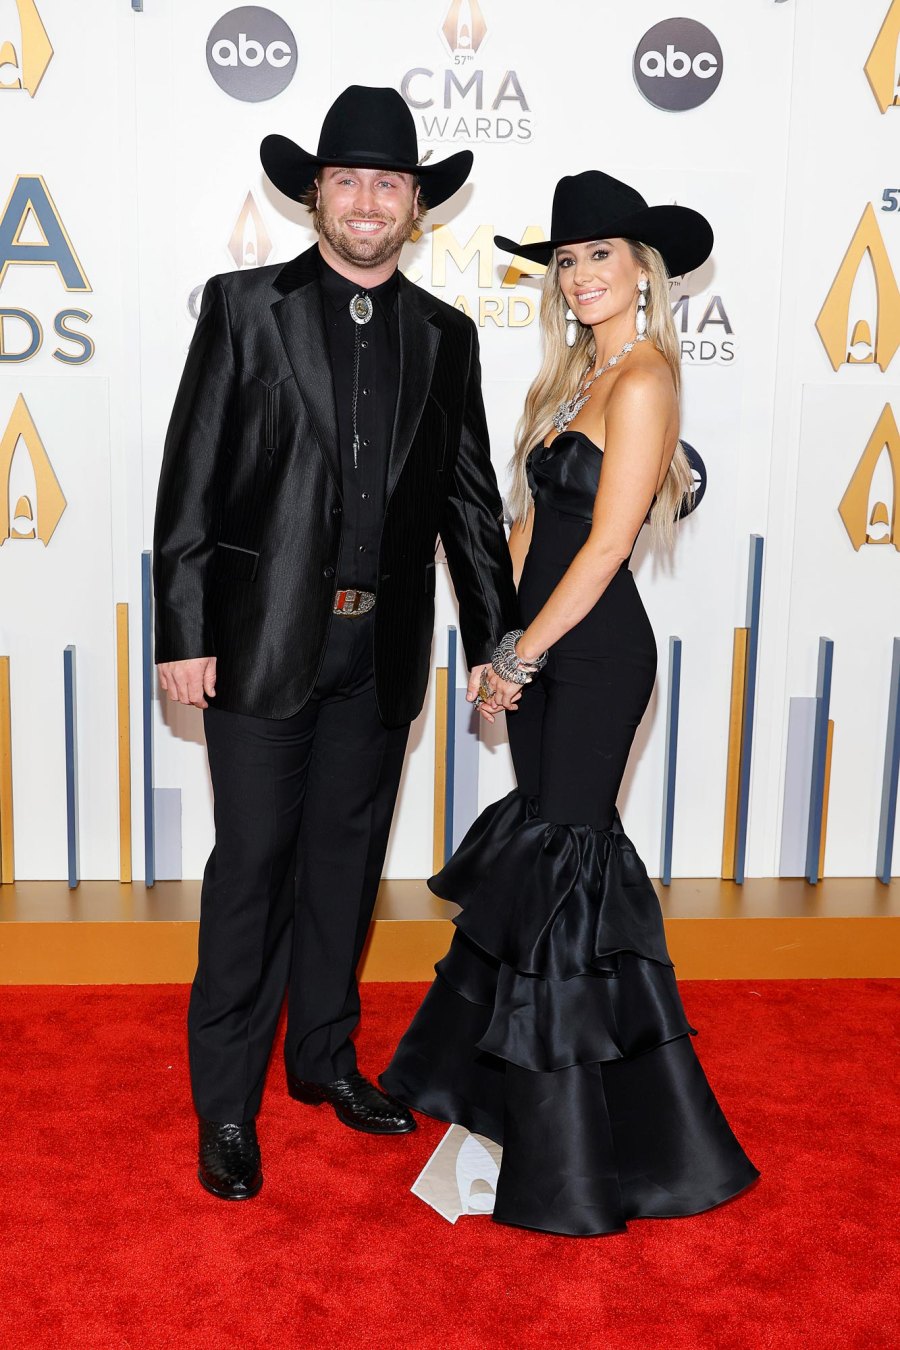 The Cutest Country Music Couples at the 2023 CMA Awards Chris Stapleton and Morgane Stapleton More 422